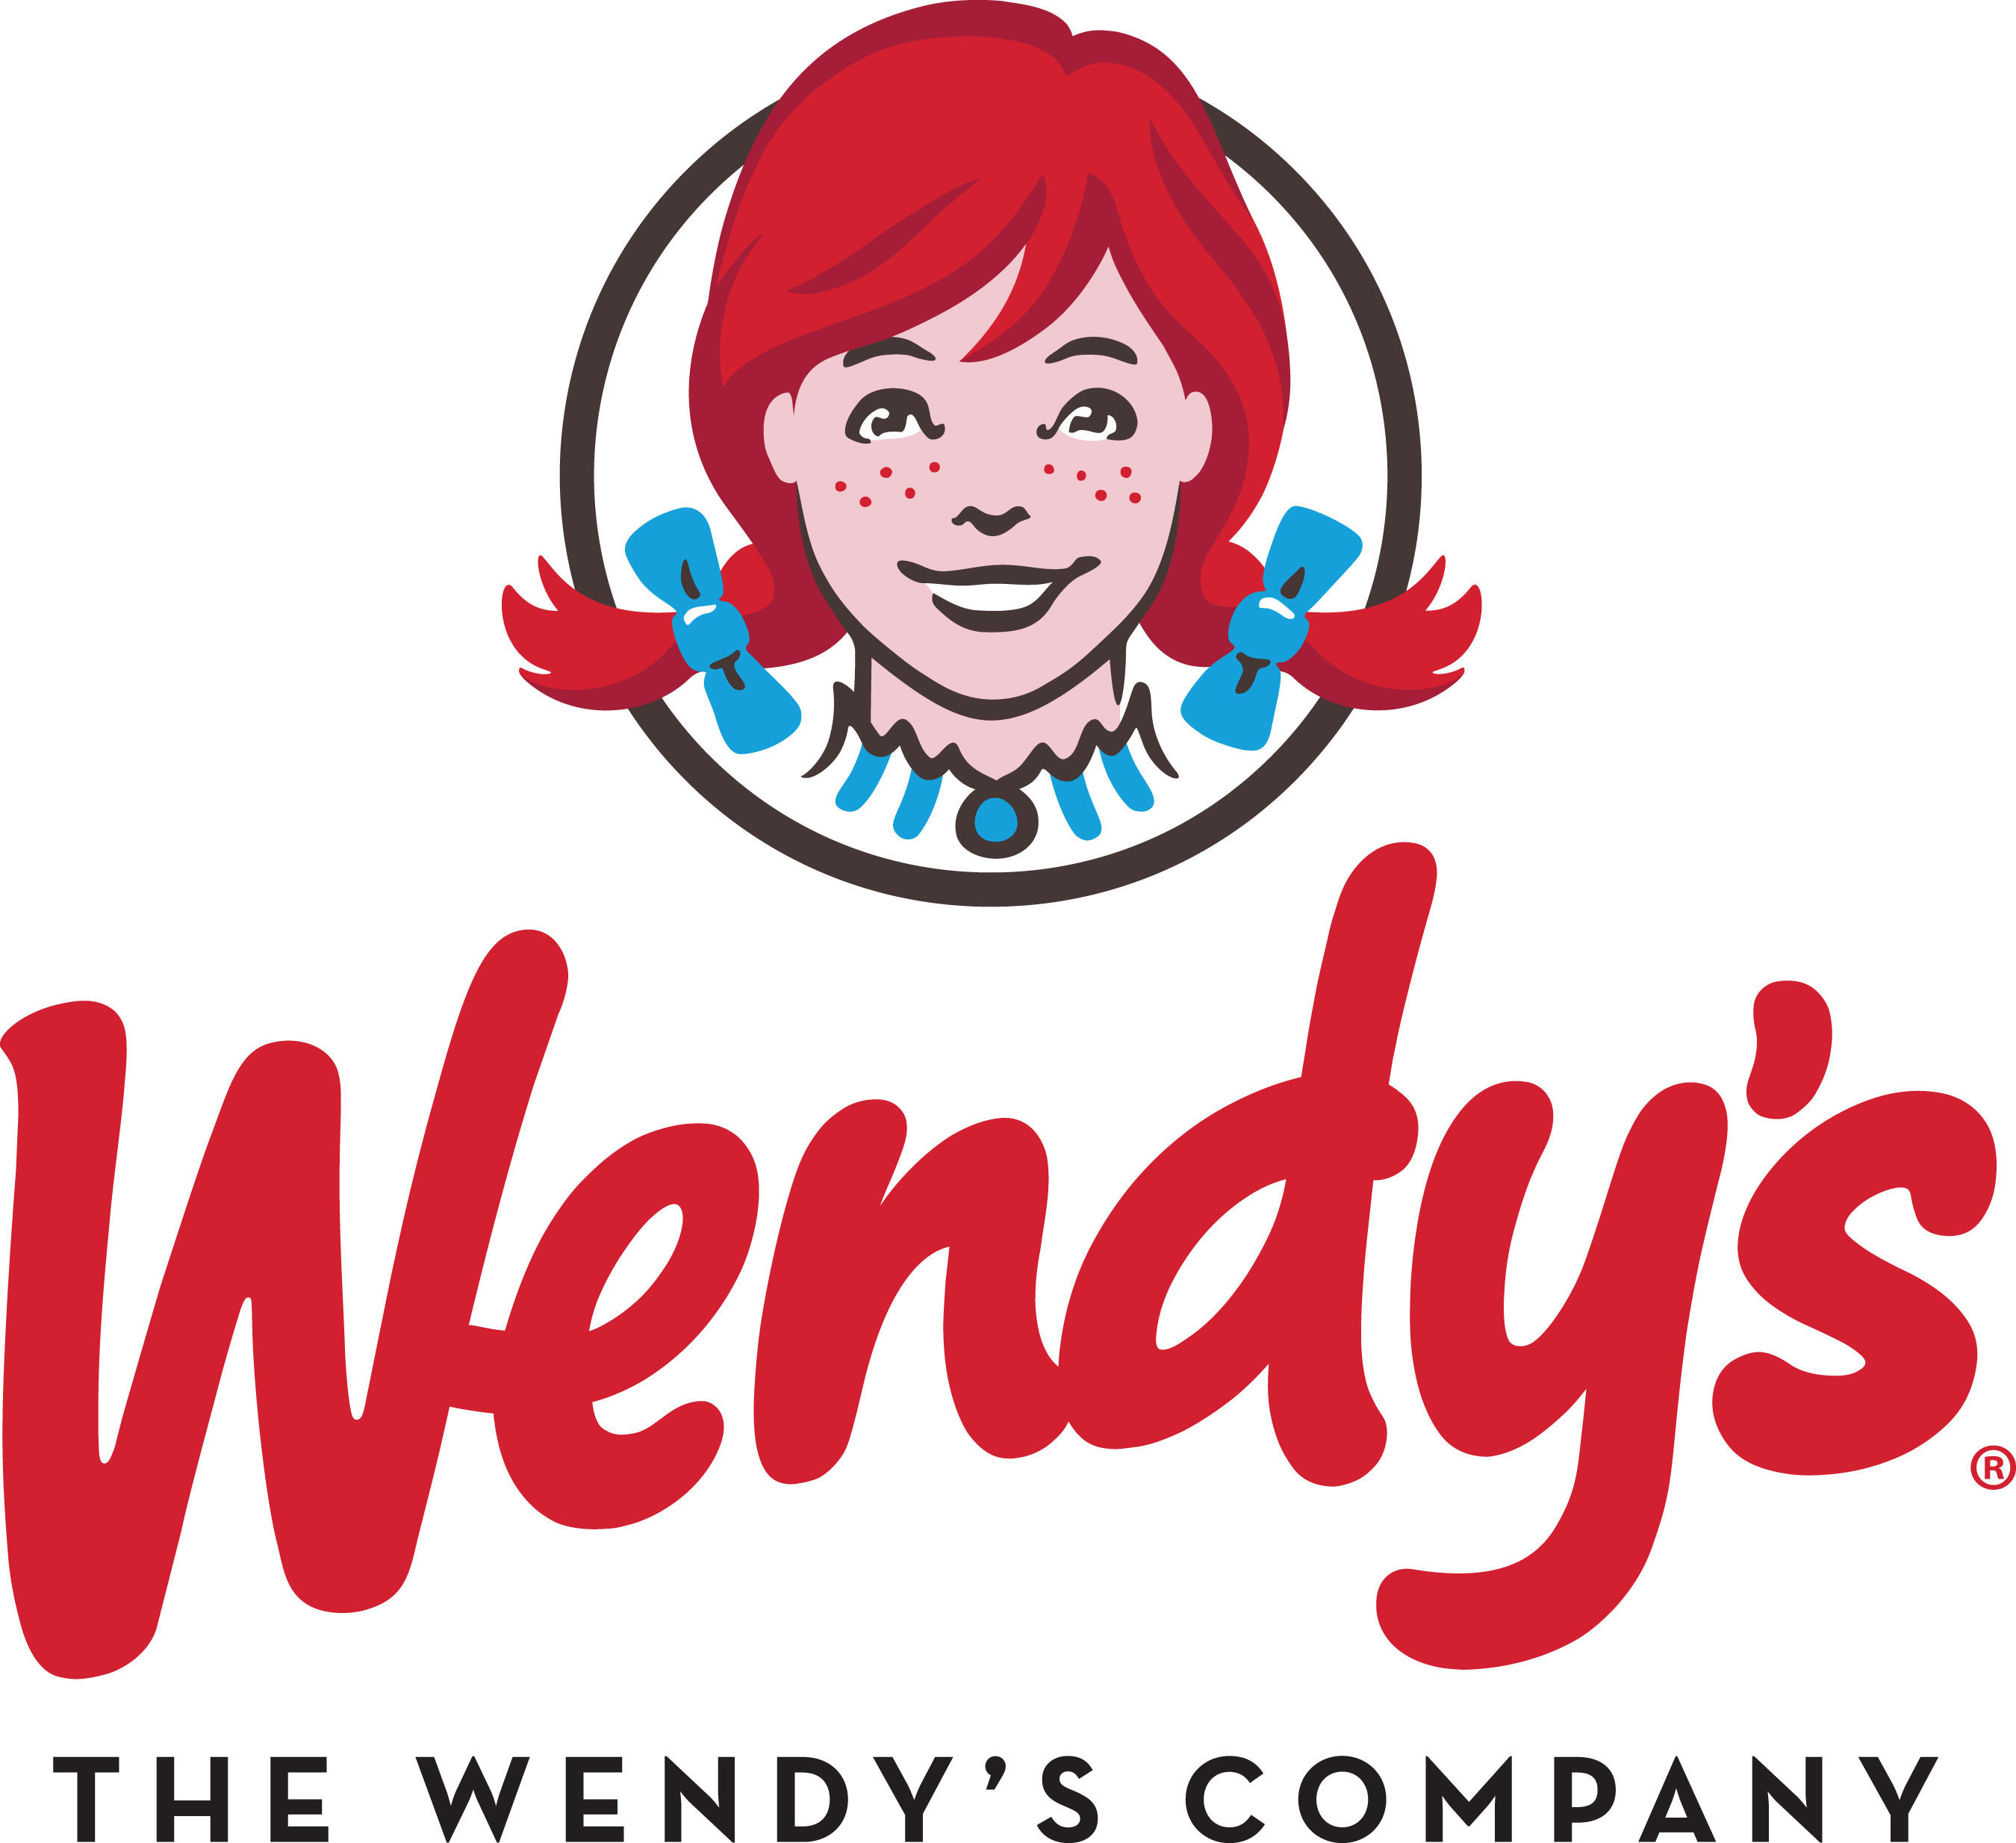 The Wendy's Company is the world's third-largest quick-service hamburger company. The Wendy's system includes approximately 6,500 franchise and Company-operated restaurants in the United States and 28 countries and U.S. territories worldwide. For more information, visit  www.aboutwendys.com . (PRNewsFoto/The Wendy's Company) (PRNewsFoto/)